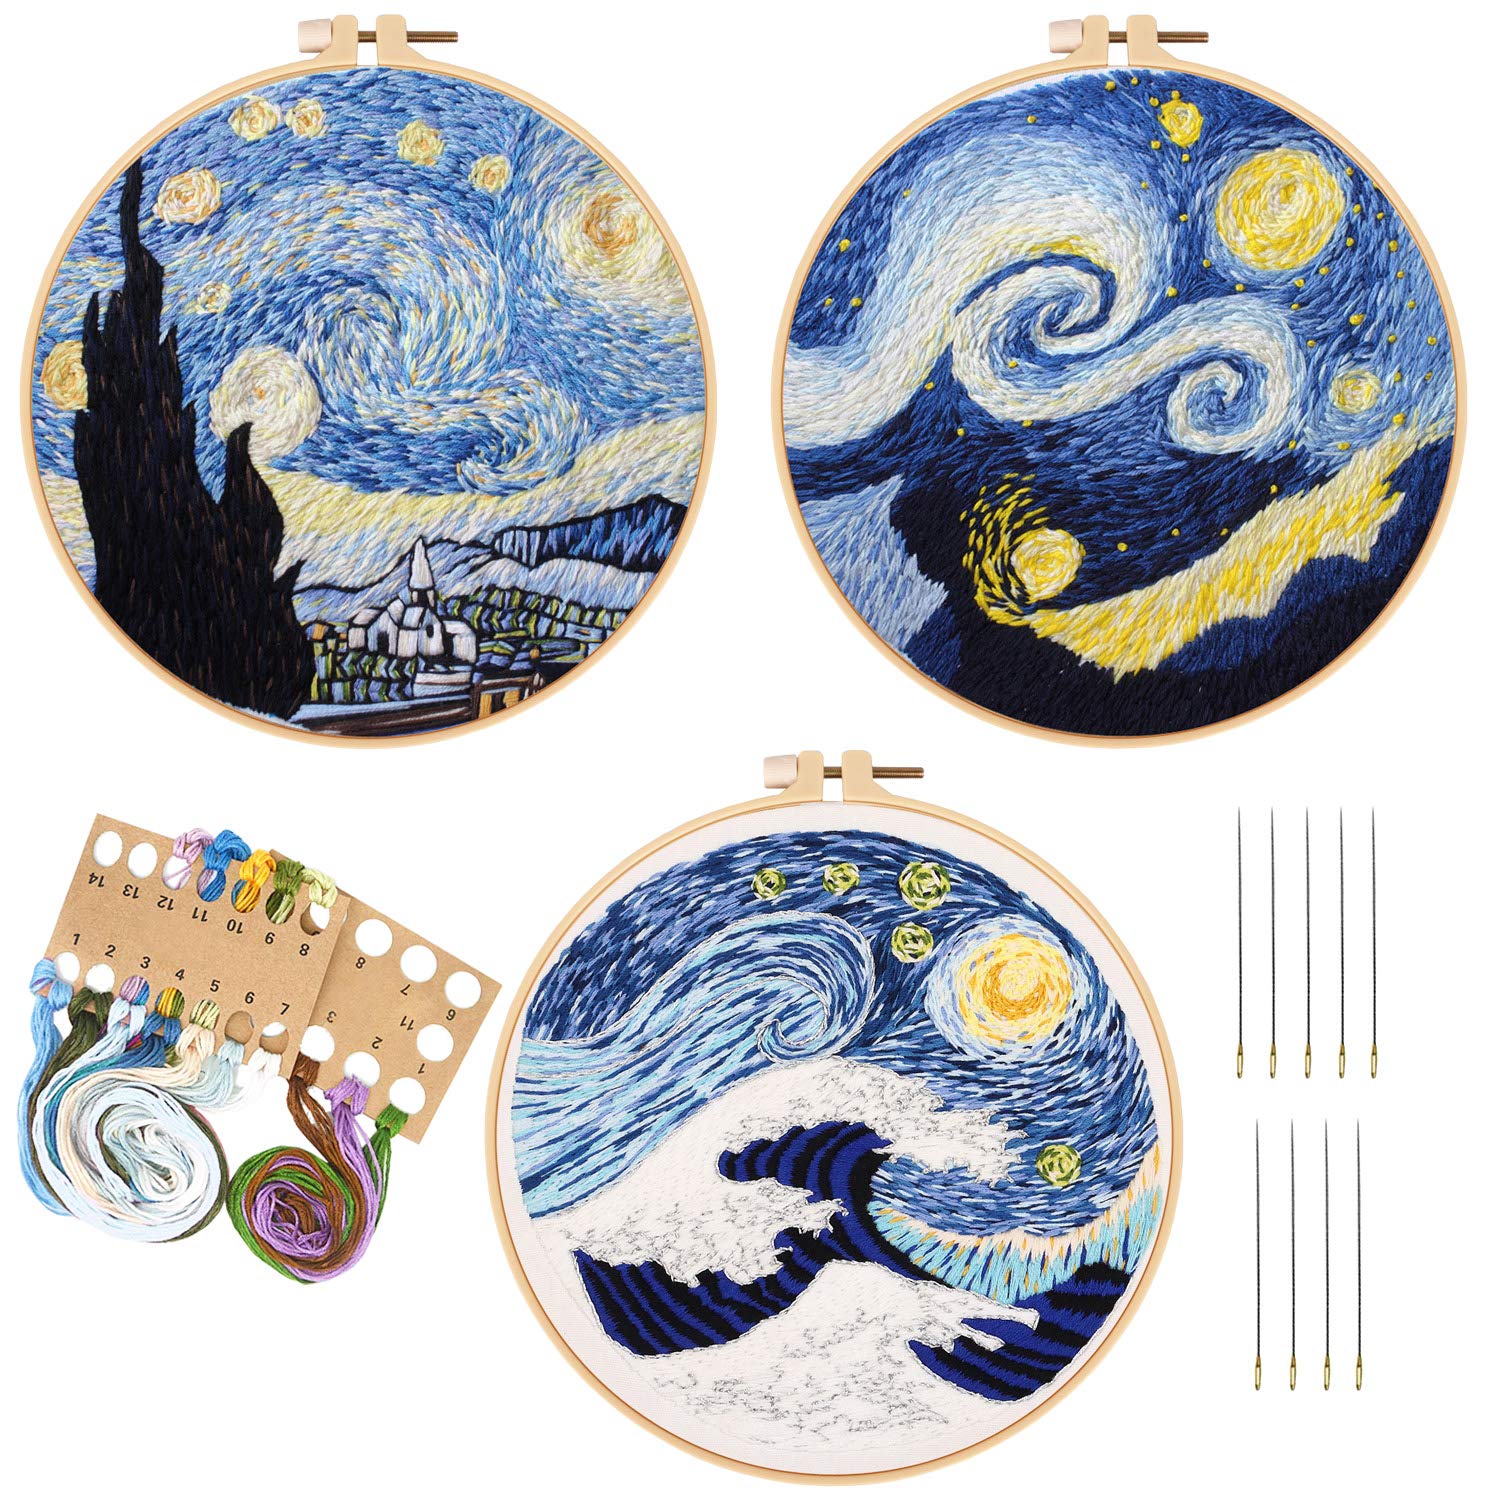 Full Range of Embroidery Starter Kit with Pattern, Cross Stitch Kit  Including Stamped Embroidery Cloth with Floral Pattern, Bamboo Embroidery  Hoop, Color Threads and Tools Kit 